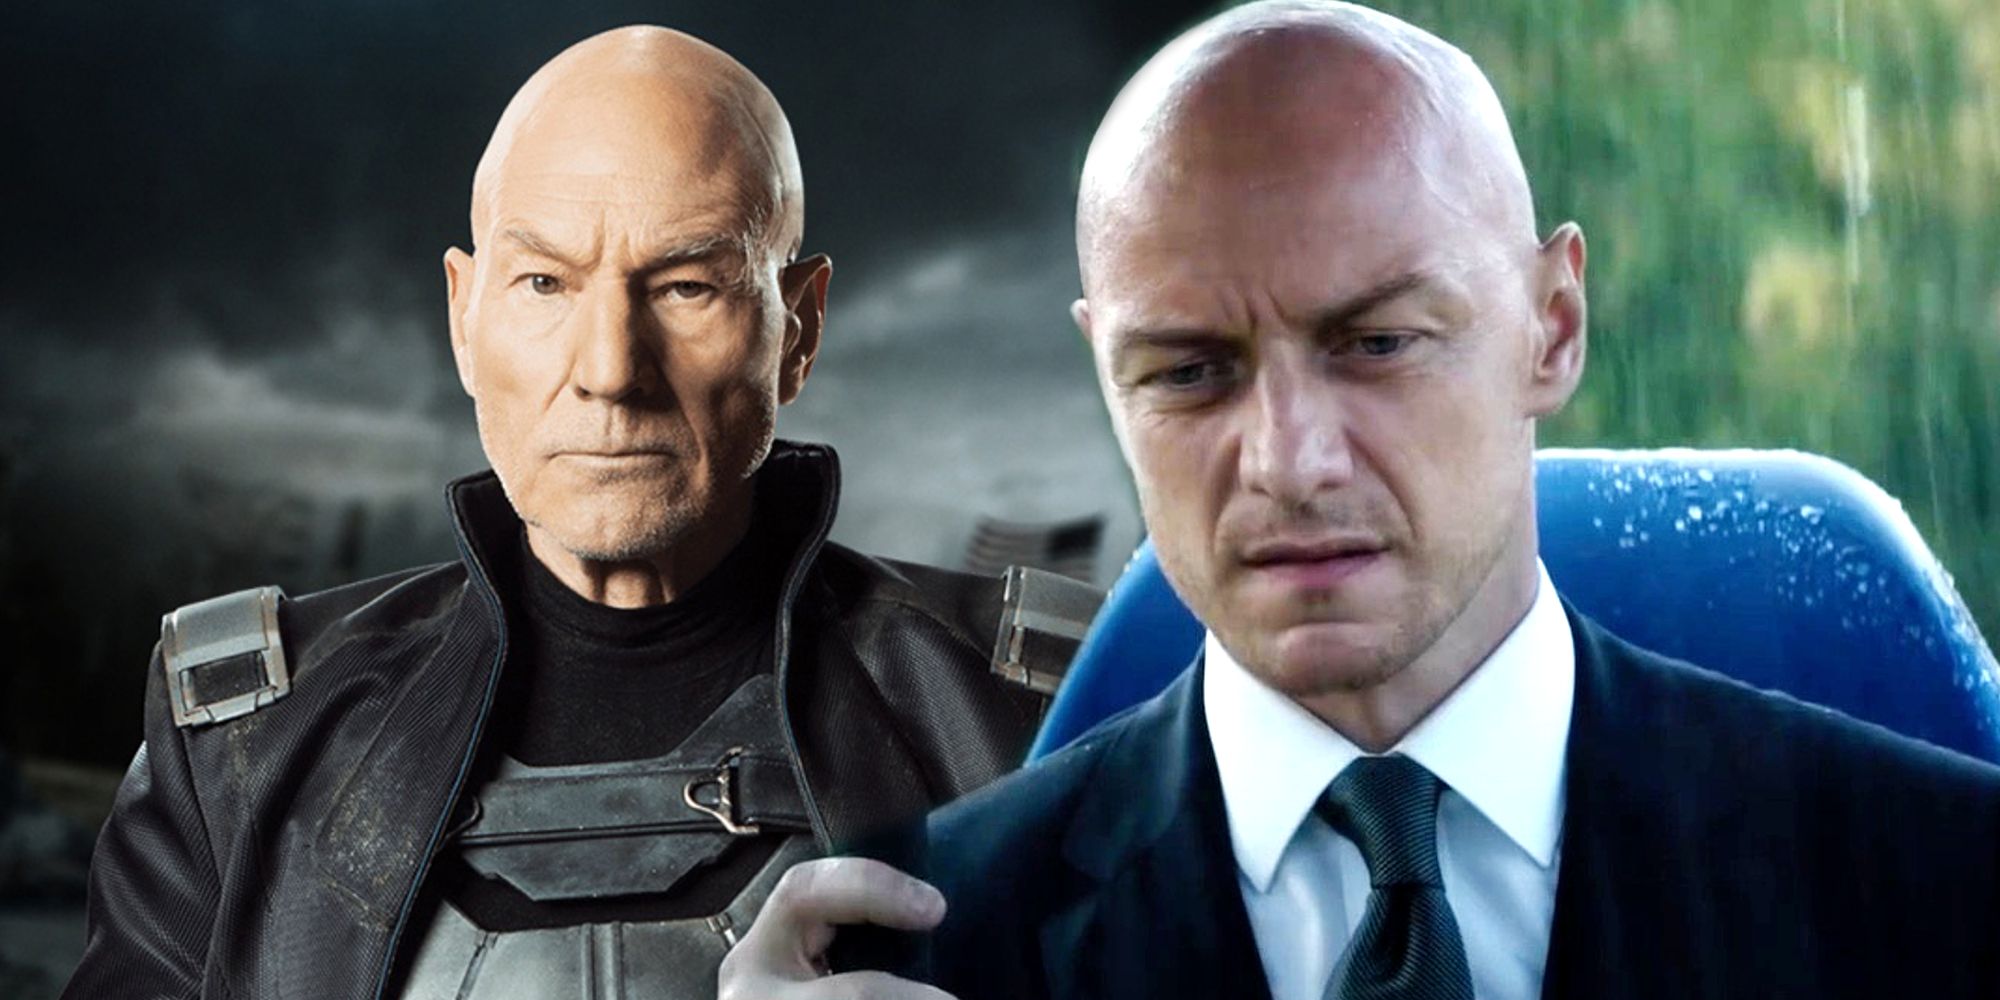 Patrick Stewart and James McAvoy as Professor X in the X-Men Movies